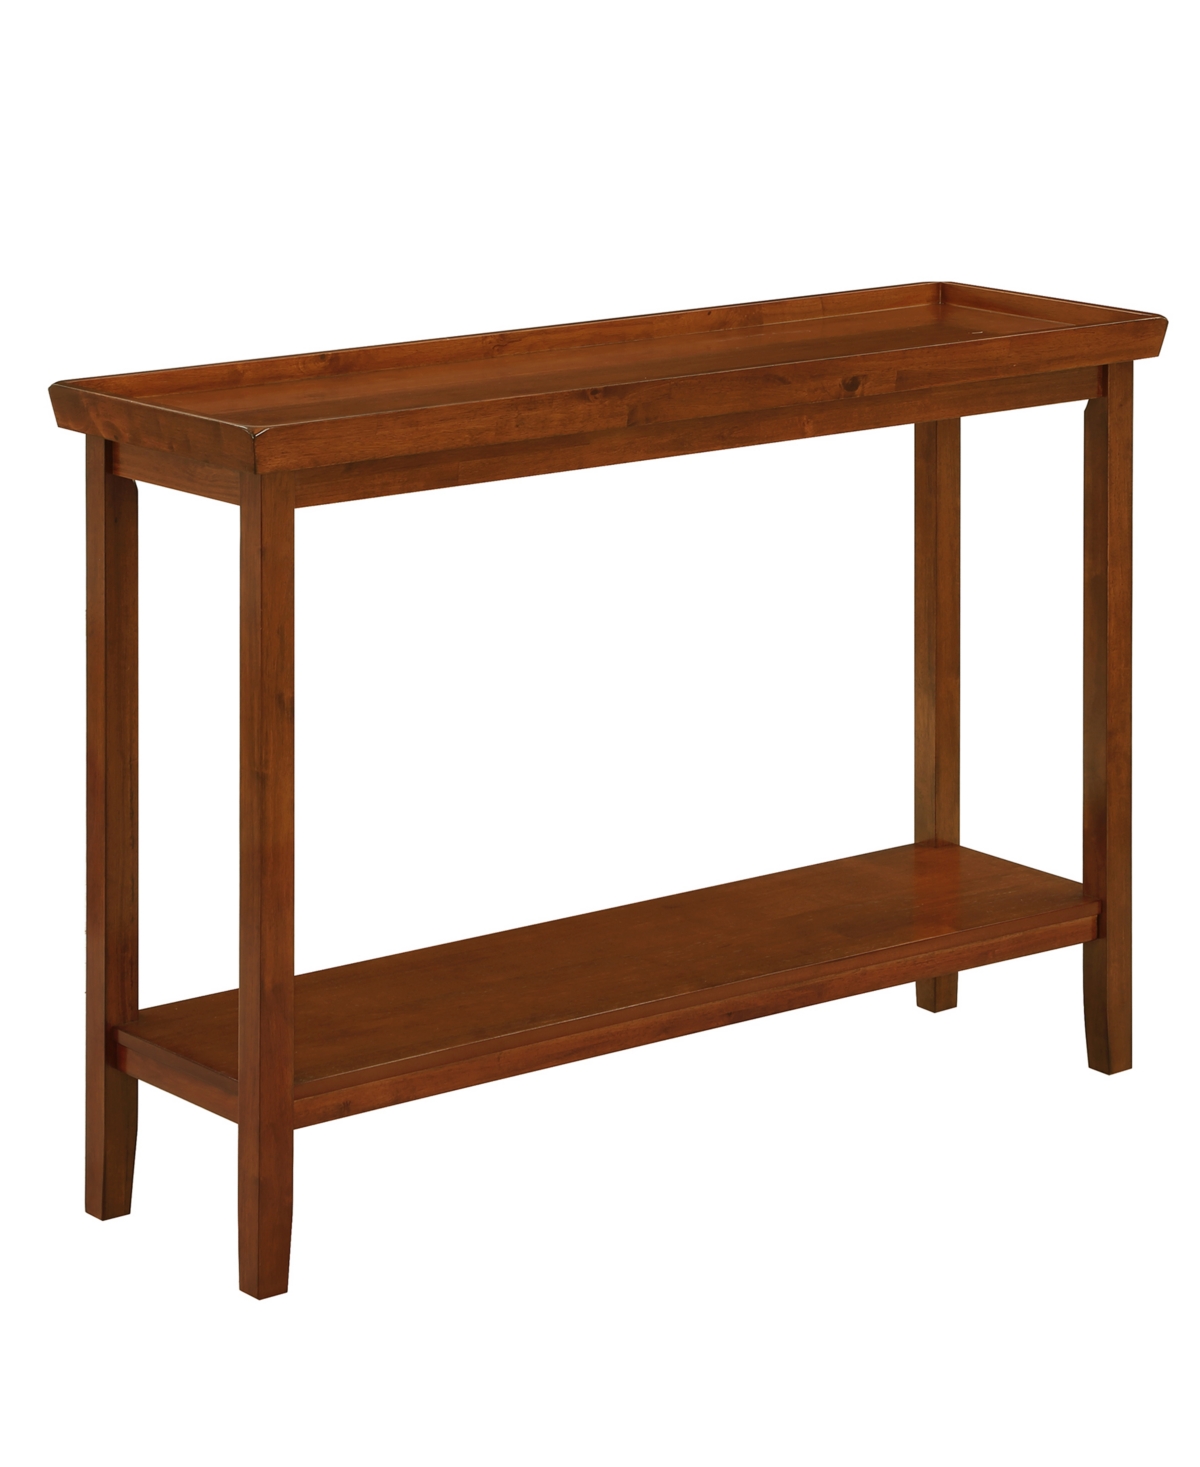 Convenience Concepts 48" Wood Ledgewood Console Table With Shelf In Mahogany